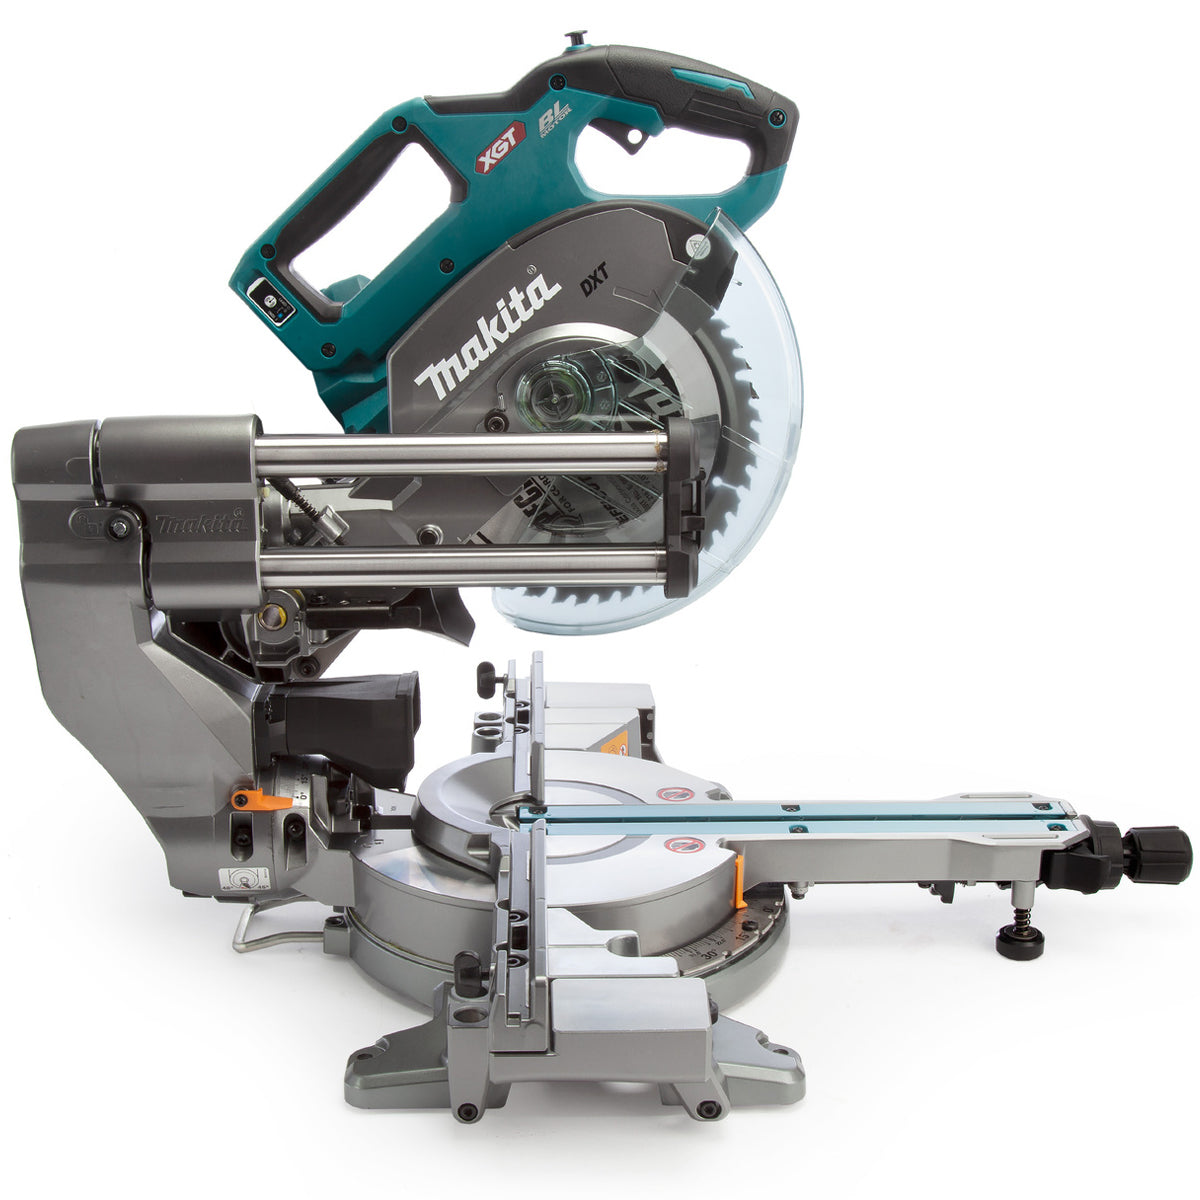 Makita LS002GZ01 40V XGT Brushless 216mm Sliding Compound Mitre Saw (Battery & Charger Not Included)